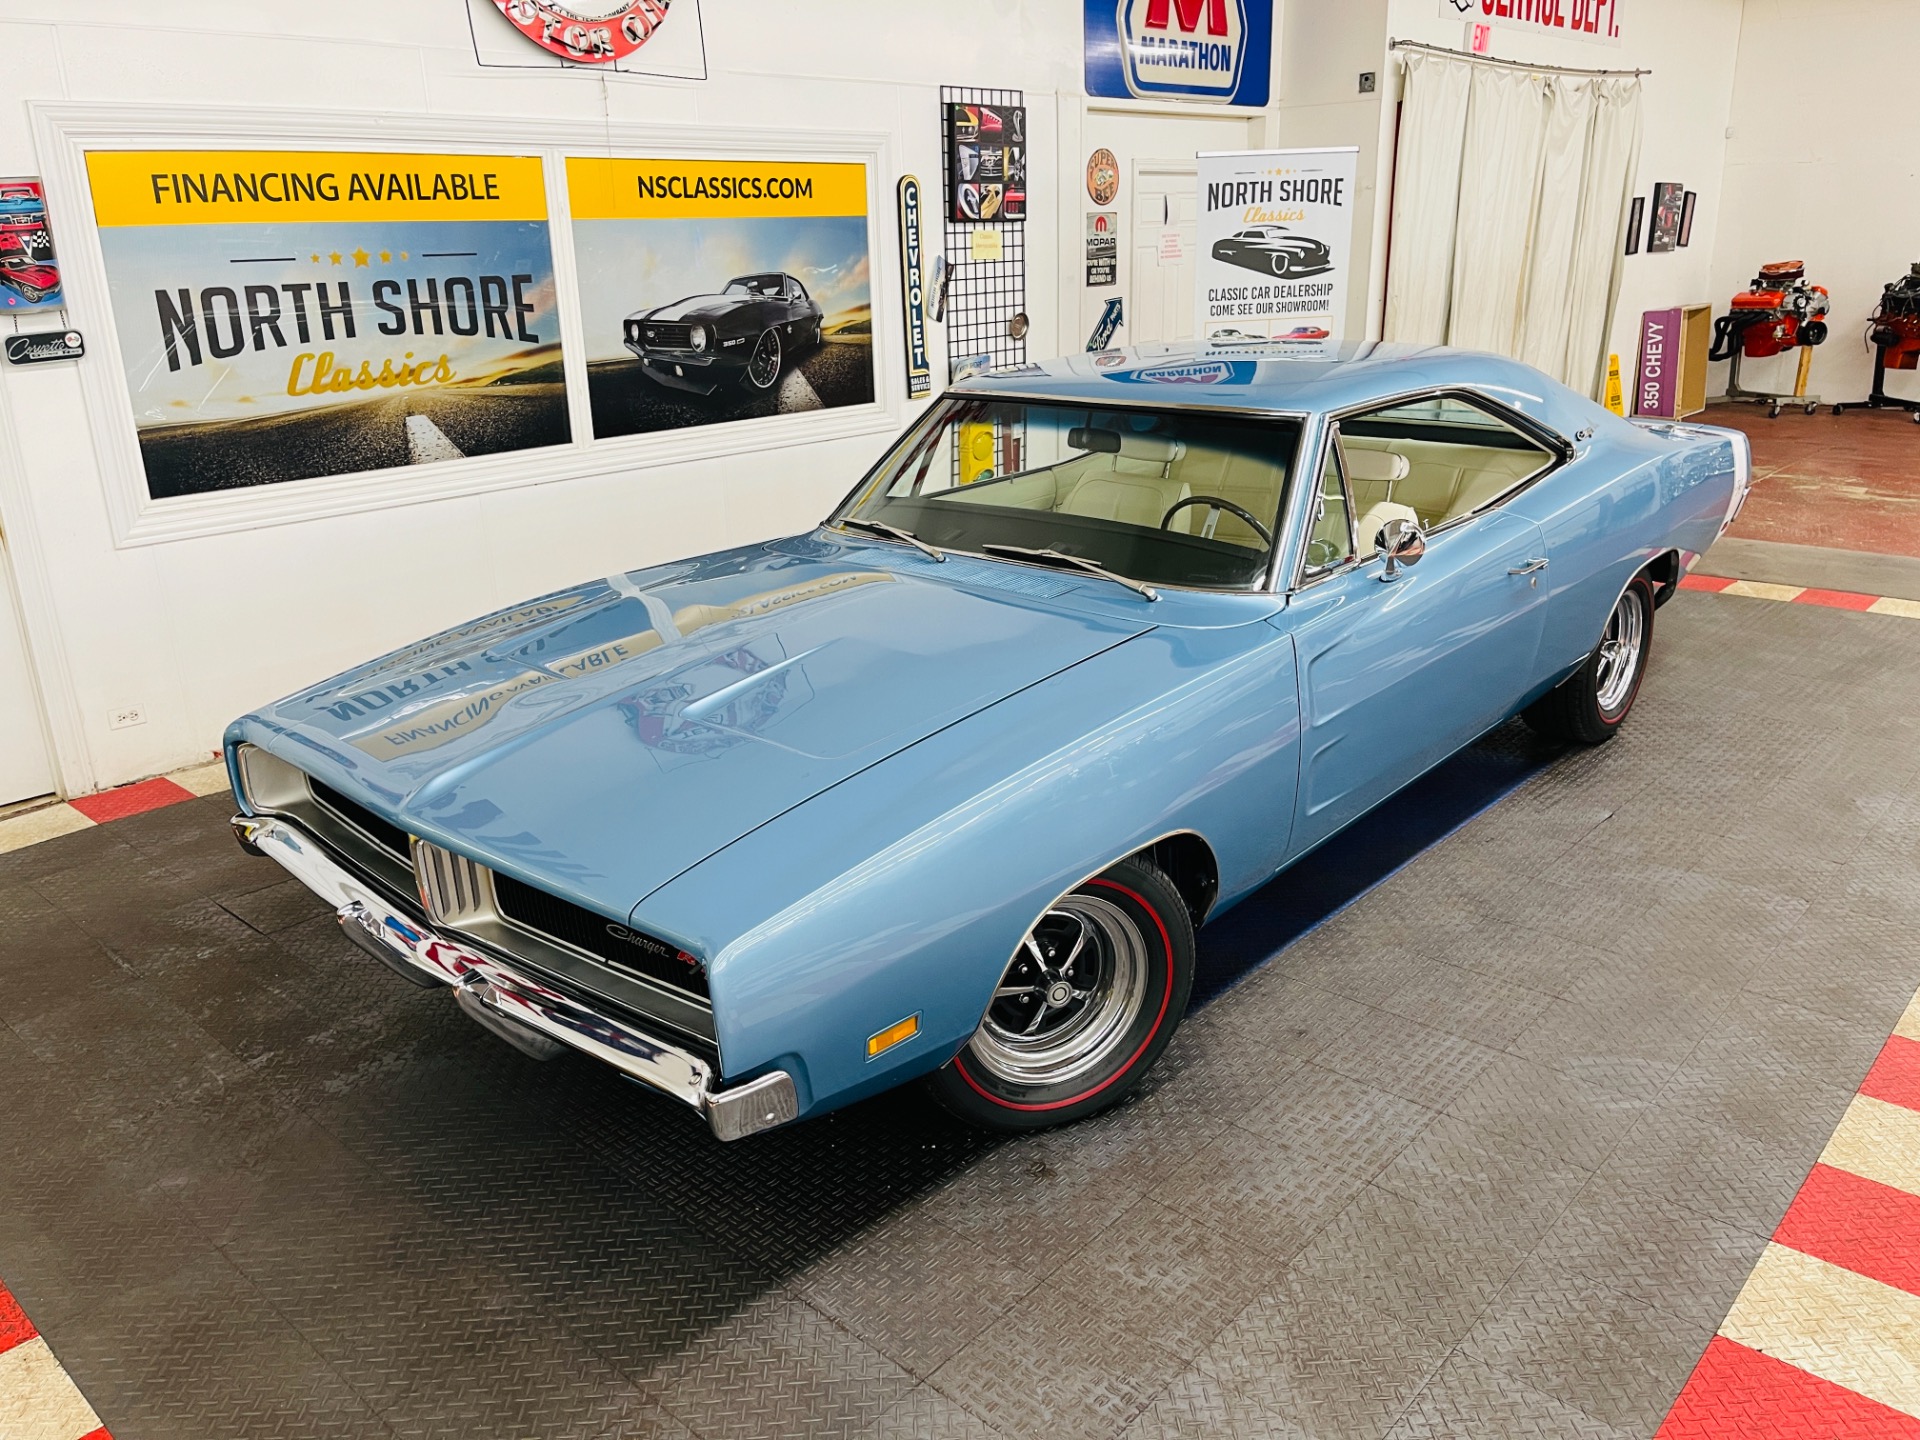 Used 1969 Dodge Charger - R/T - 440 MAGNUM - 4 SPEED TRANS - B3 BLUE - SEE VIDEO | Mundelein, IL